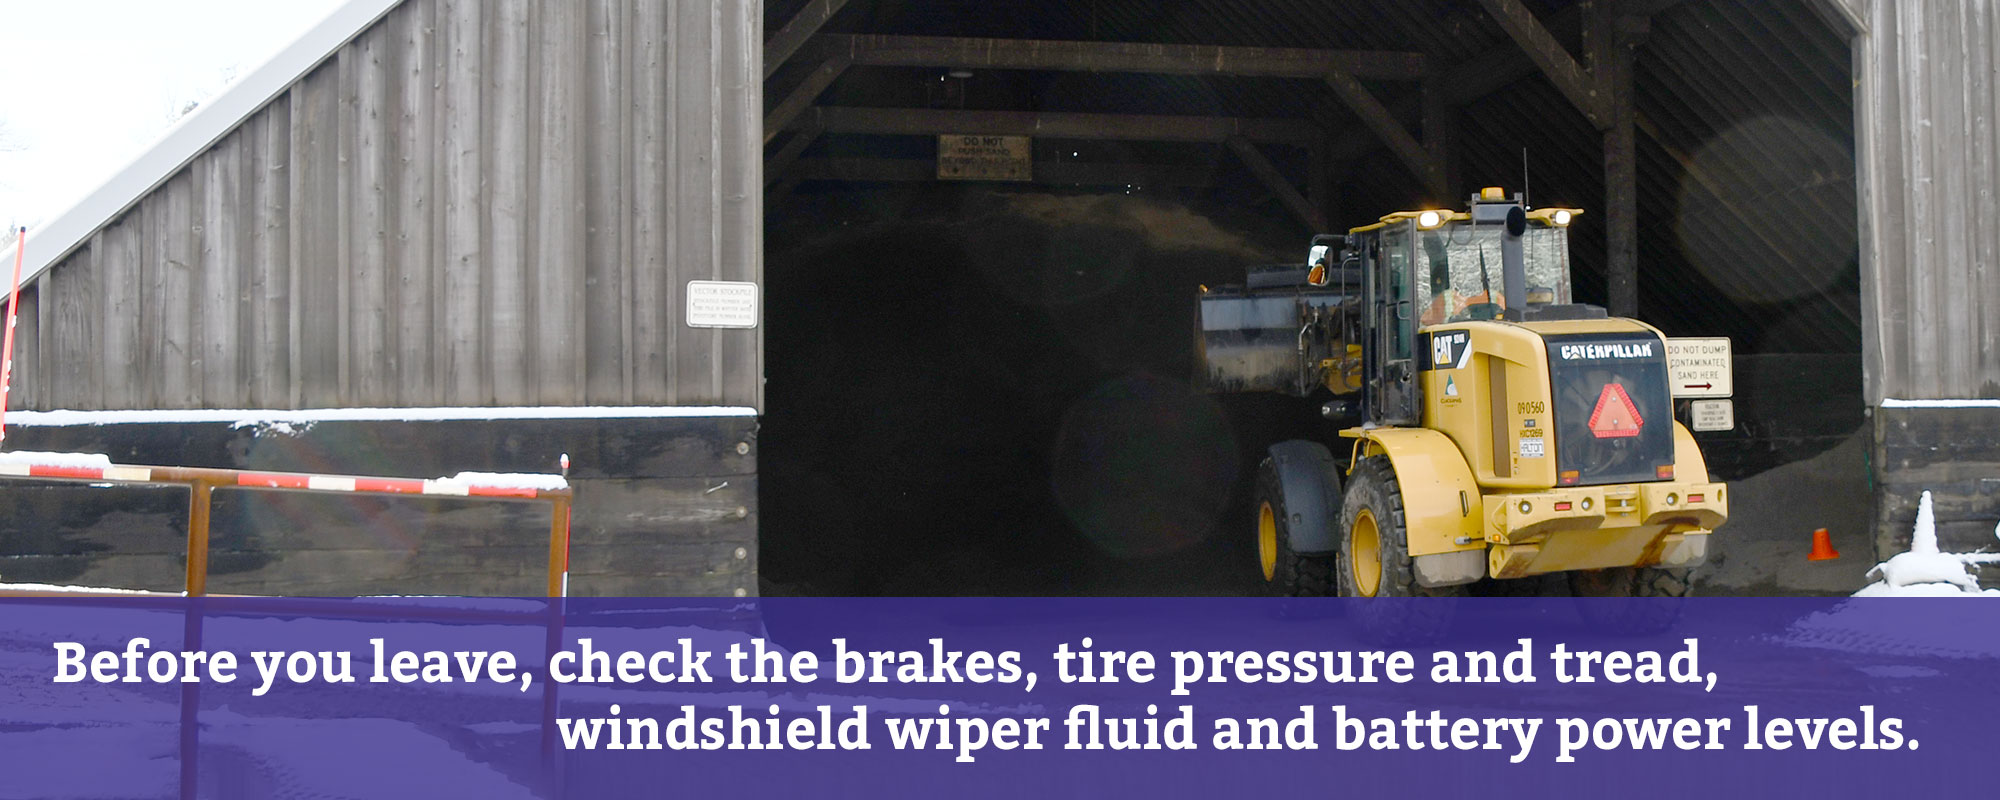 Before you leave, check the brakes, tire pressure and tread, windshield wiper fluid and battery power levels.